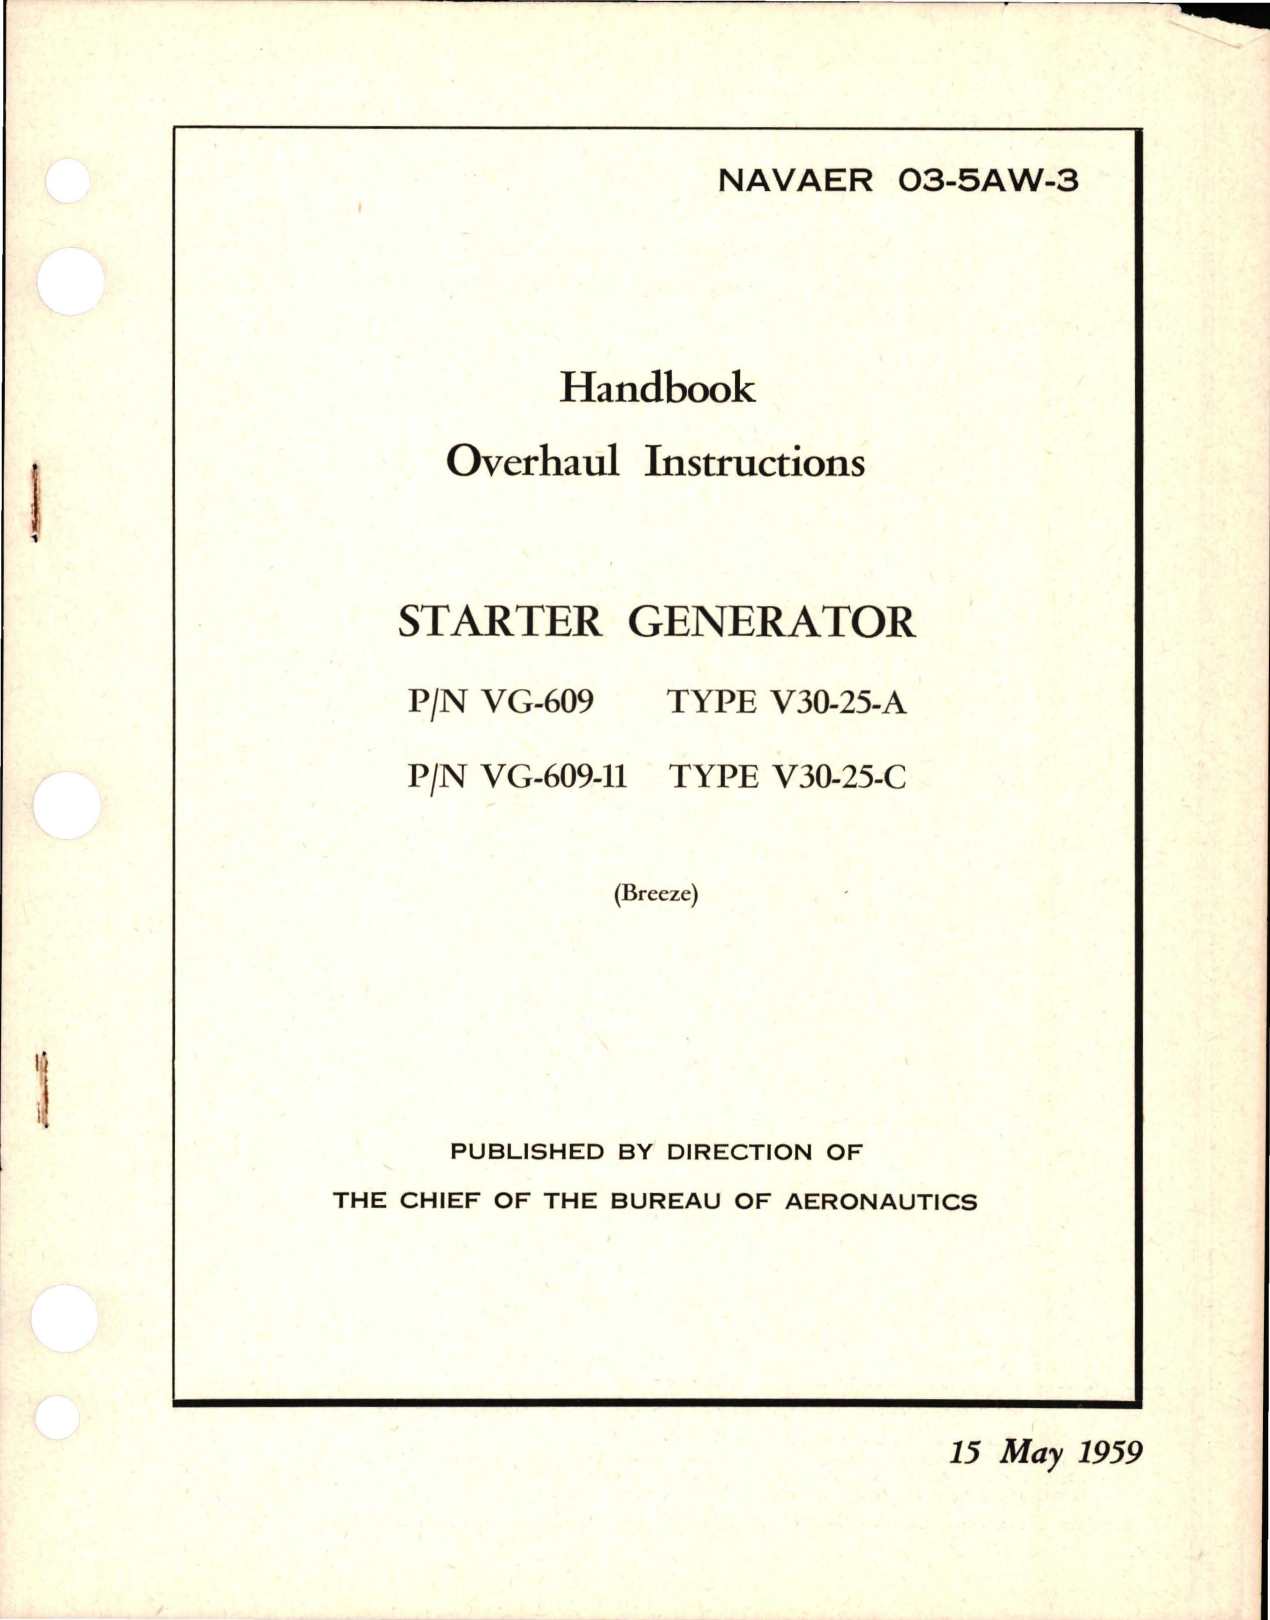 Sample page 1 from AirCorps Library document: Overhaul Instructions for Starter Generator - Parts VG-609 and VG-609-11 - Types V-30-25-A and V30-25-C